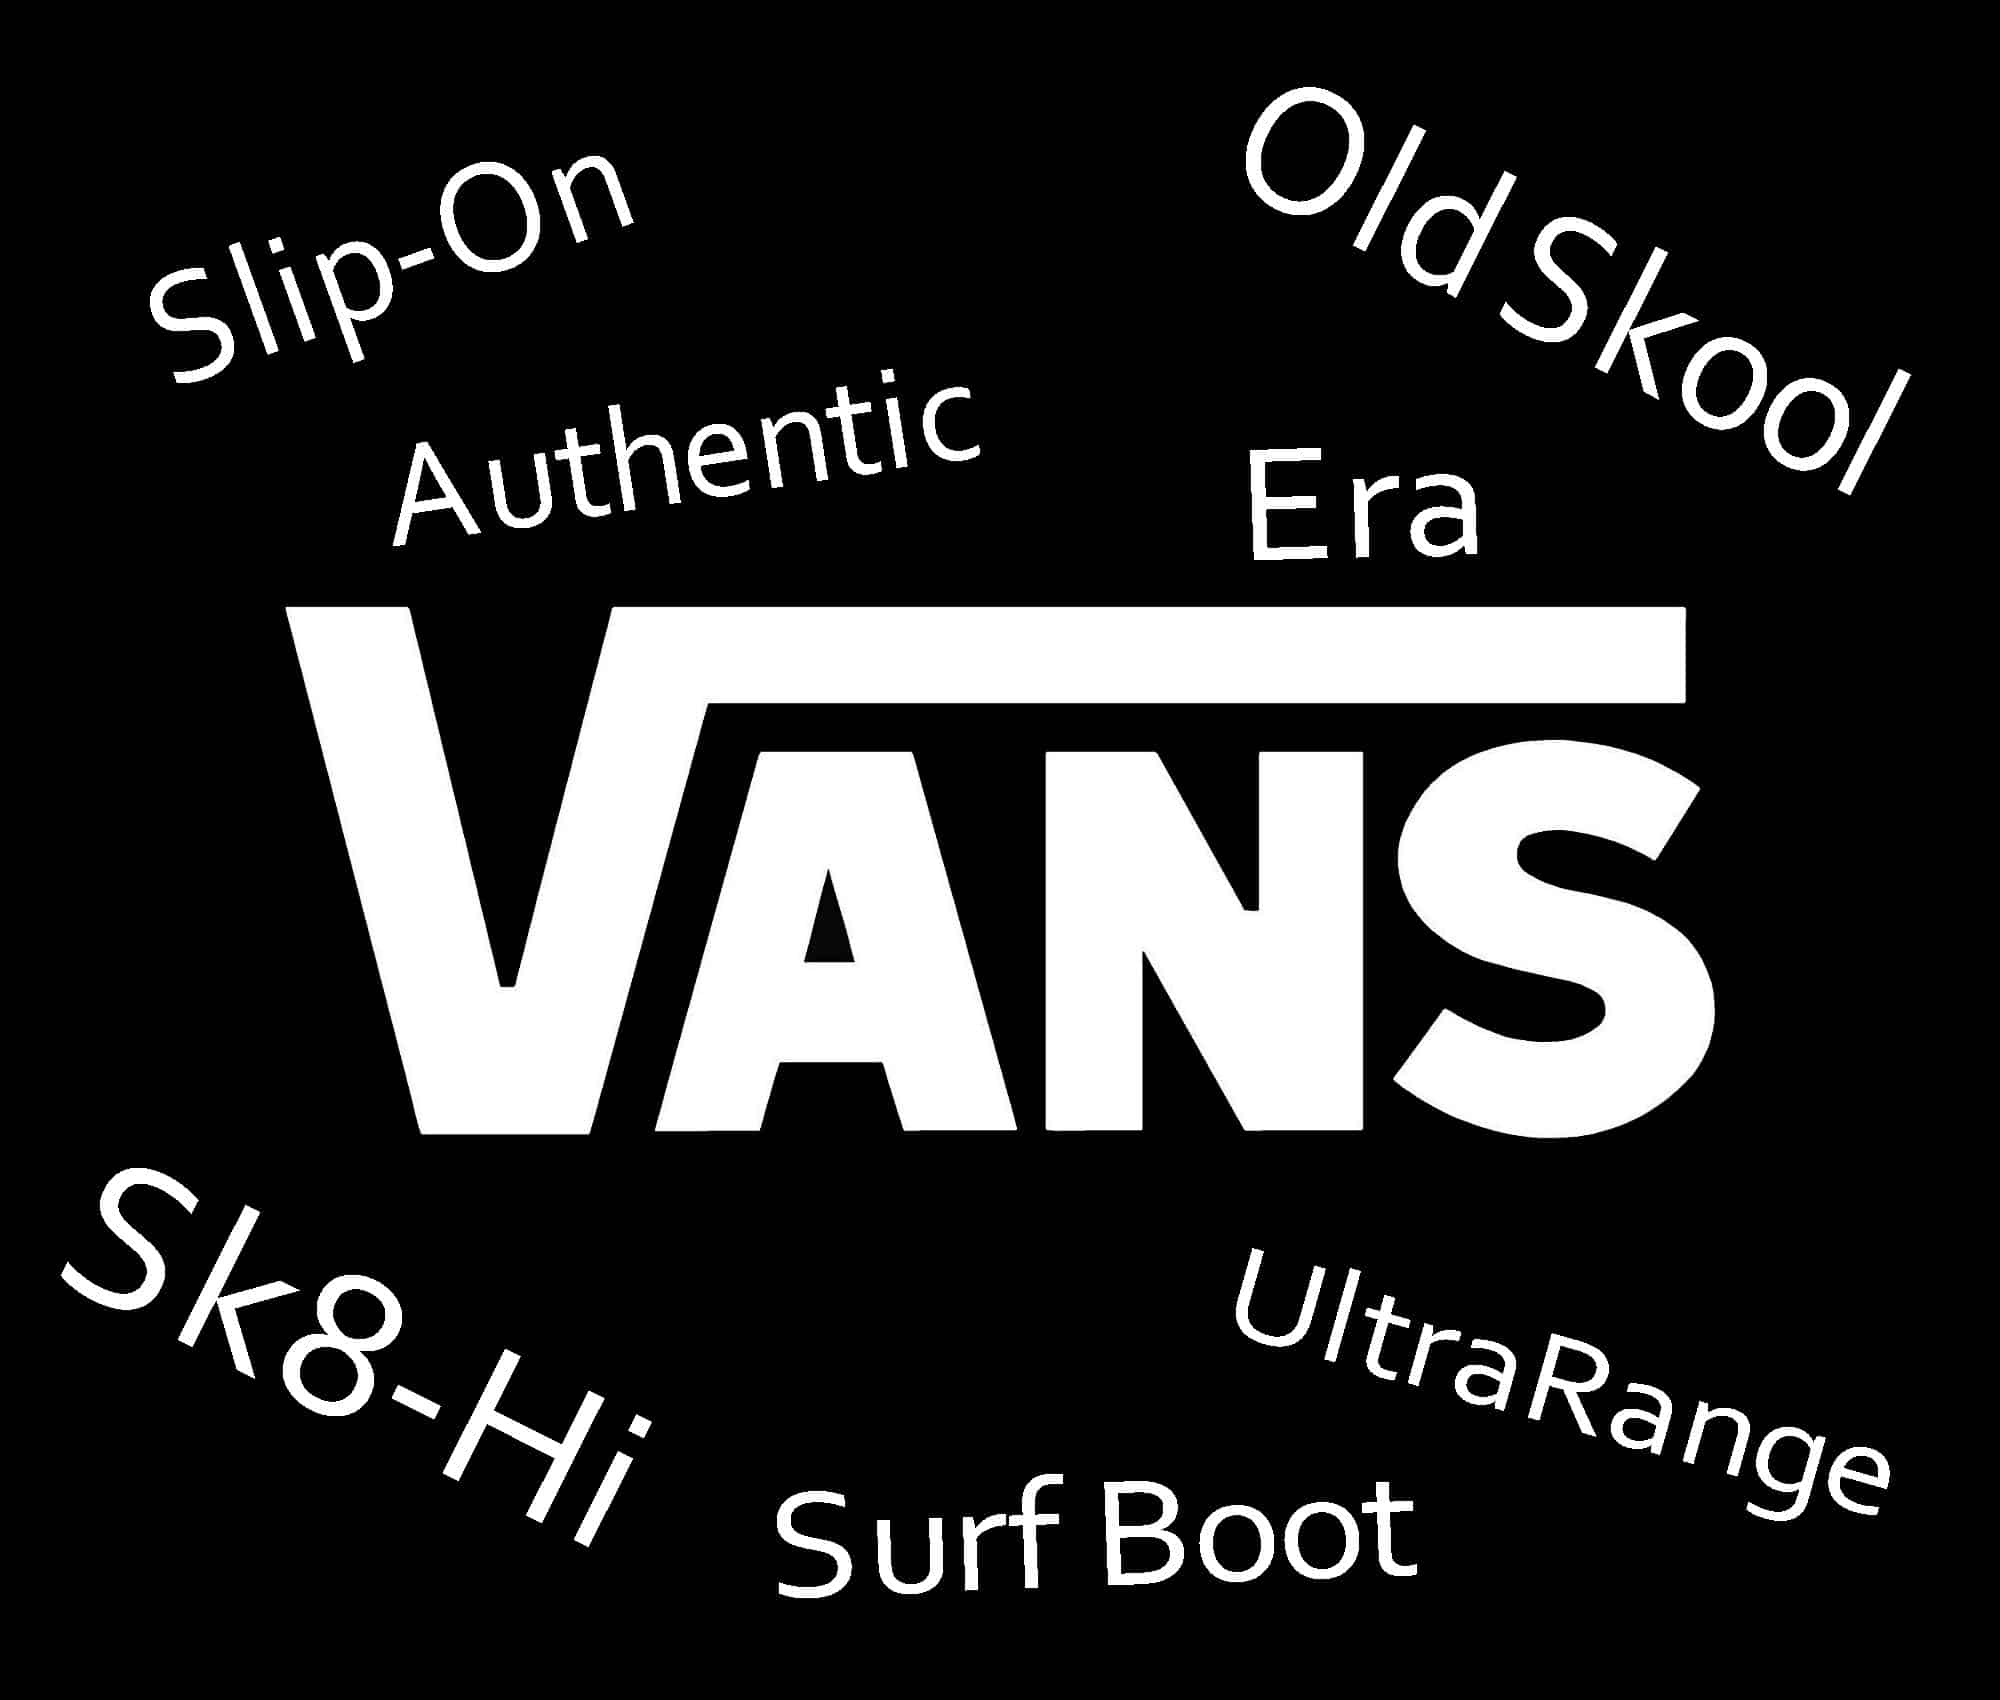 The Multiple Levels of Vans Shoes